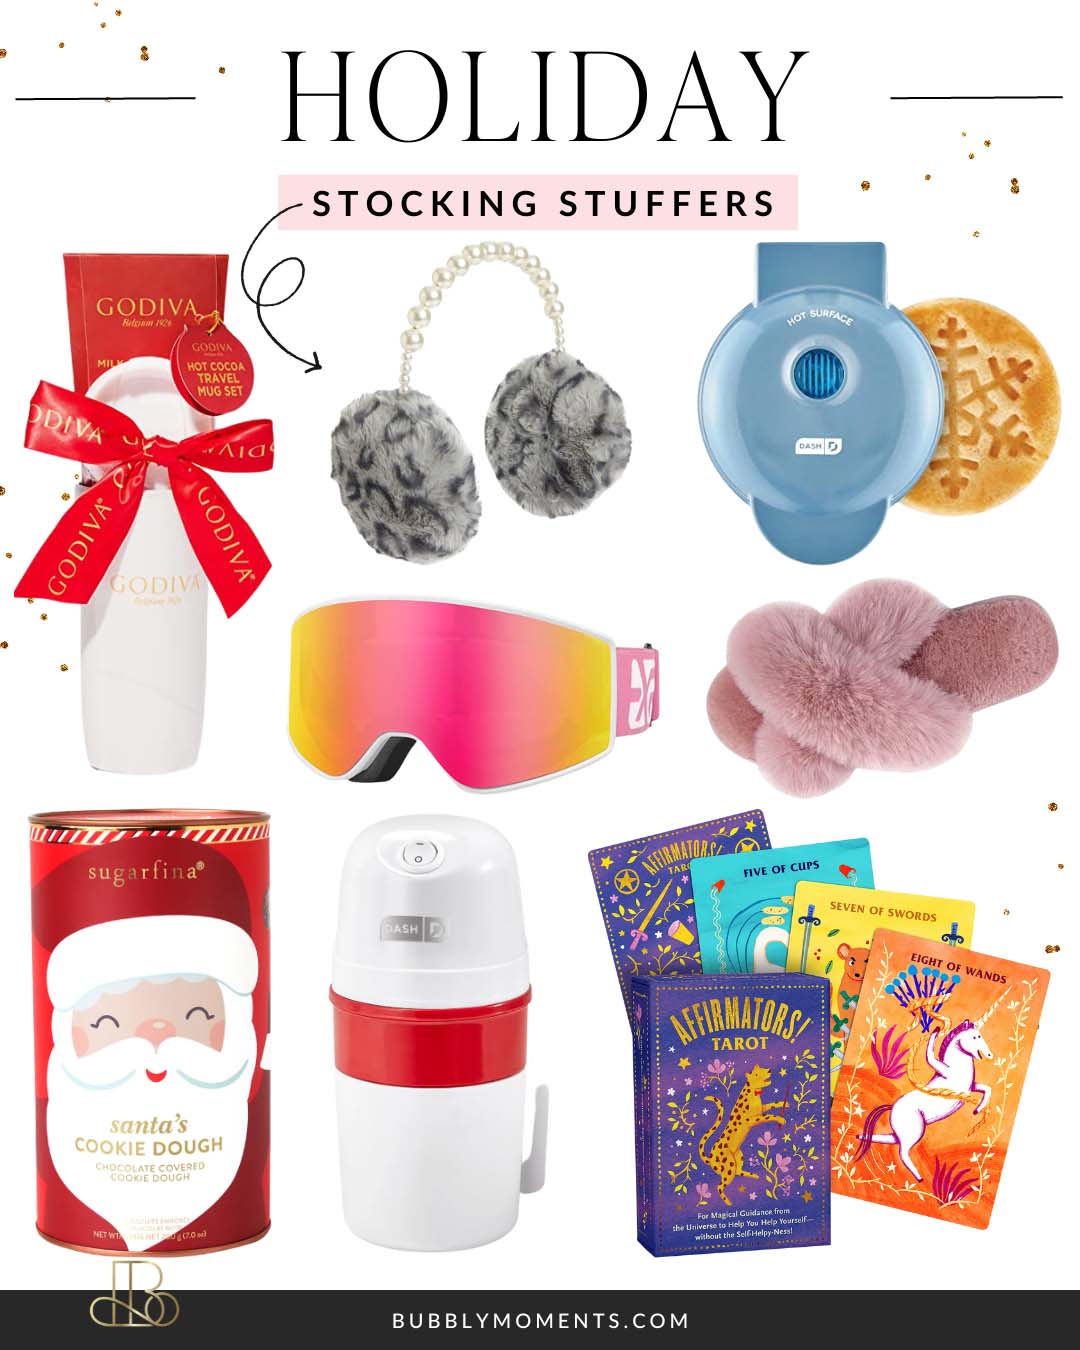 Holiday Deals Under $25: Grab Last-Minute Stocking Stuffers and